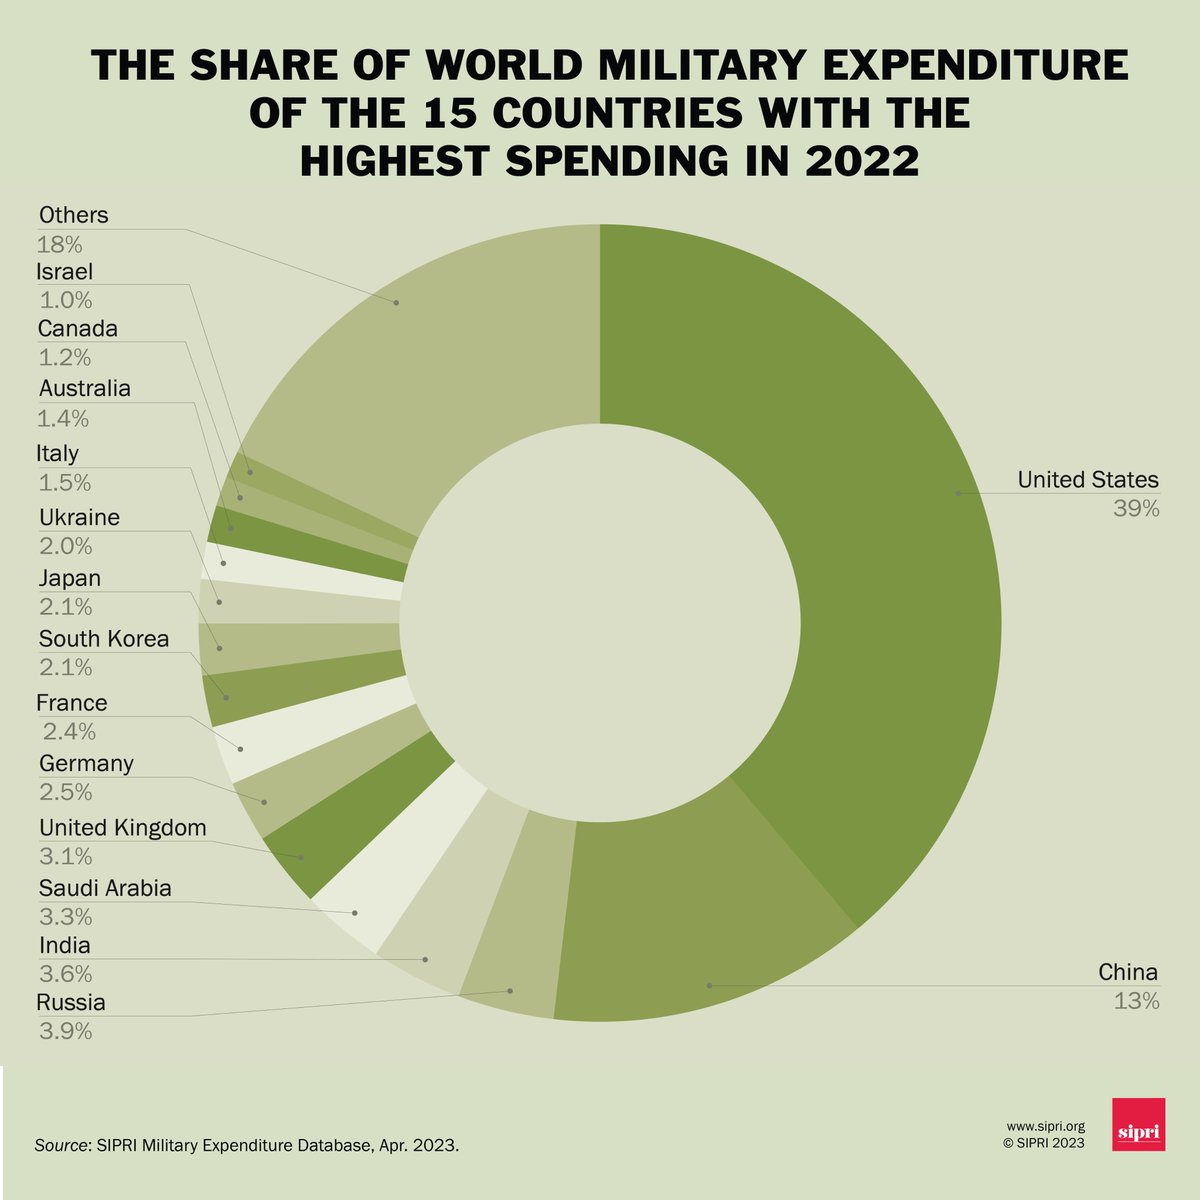 Who were the top 10 military spenders in 2022?

1) USA🇺🇸
2) China🇨🇳
3) Russia🇷🇺
4) India🇮🇳
5) Saudi Arabia🇸🇦
6) UK🇬🇧
7) Germany🇩🇪
8) France🇫🇷
9) South Korea🇰🇷
10) Japan🇯🇵

Together they spent $1682 billion, accounting for 75% of global military spending ➡️doi.org/10.55163/PNVP2…